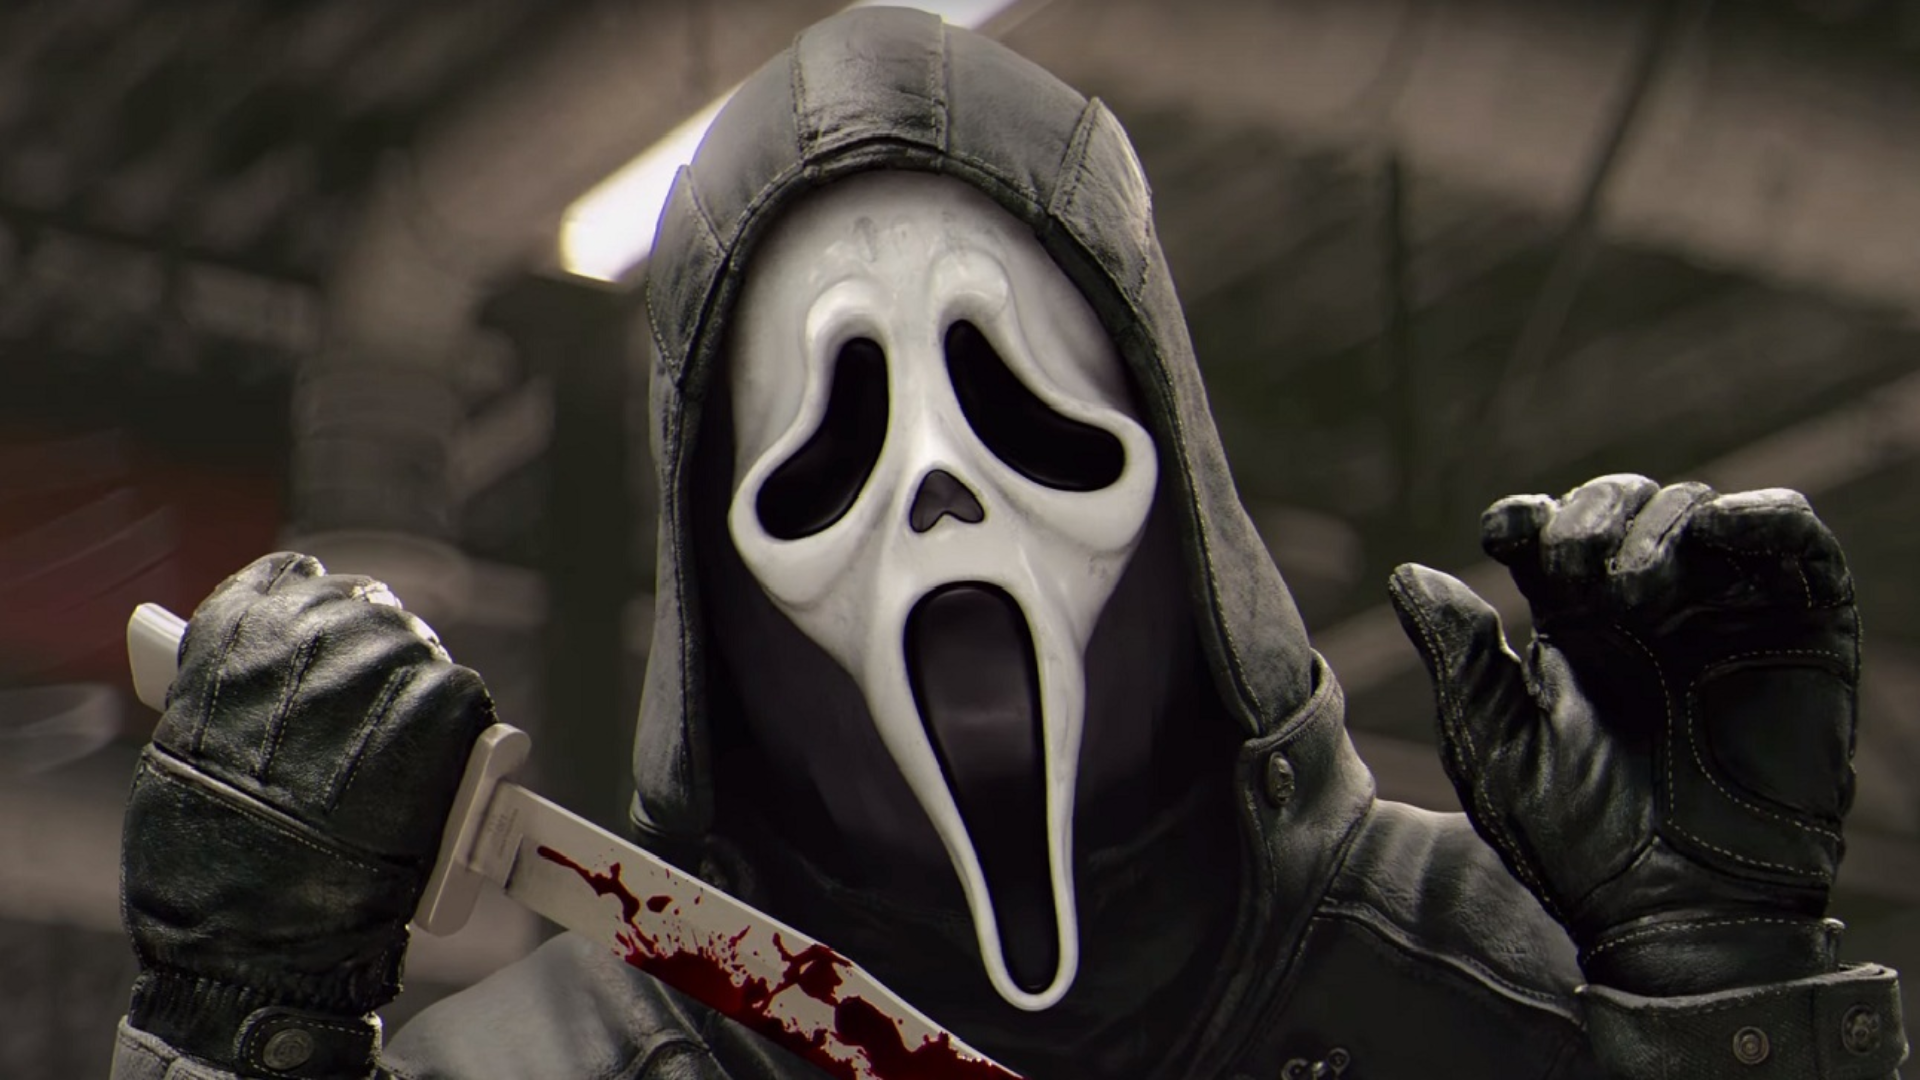 Ghost Face Wallpaper  NawPic